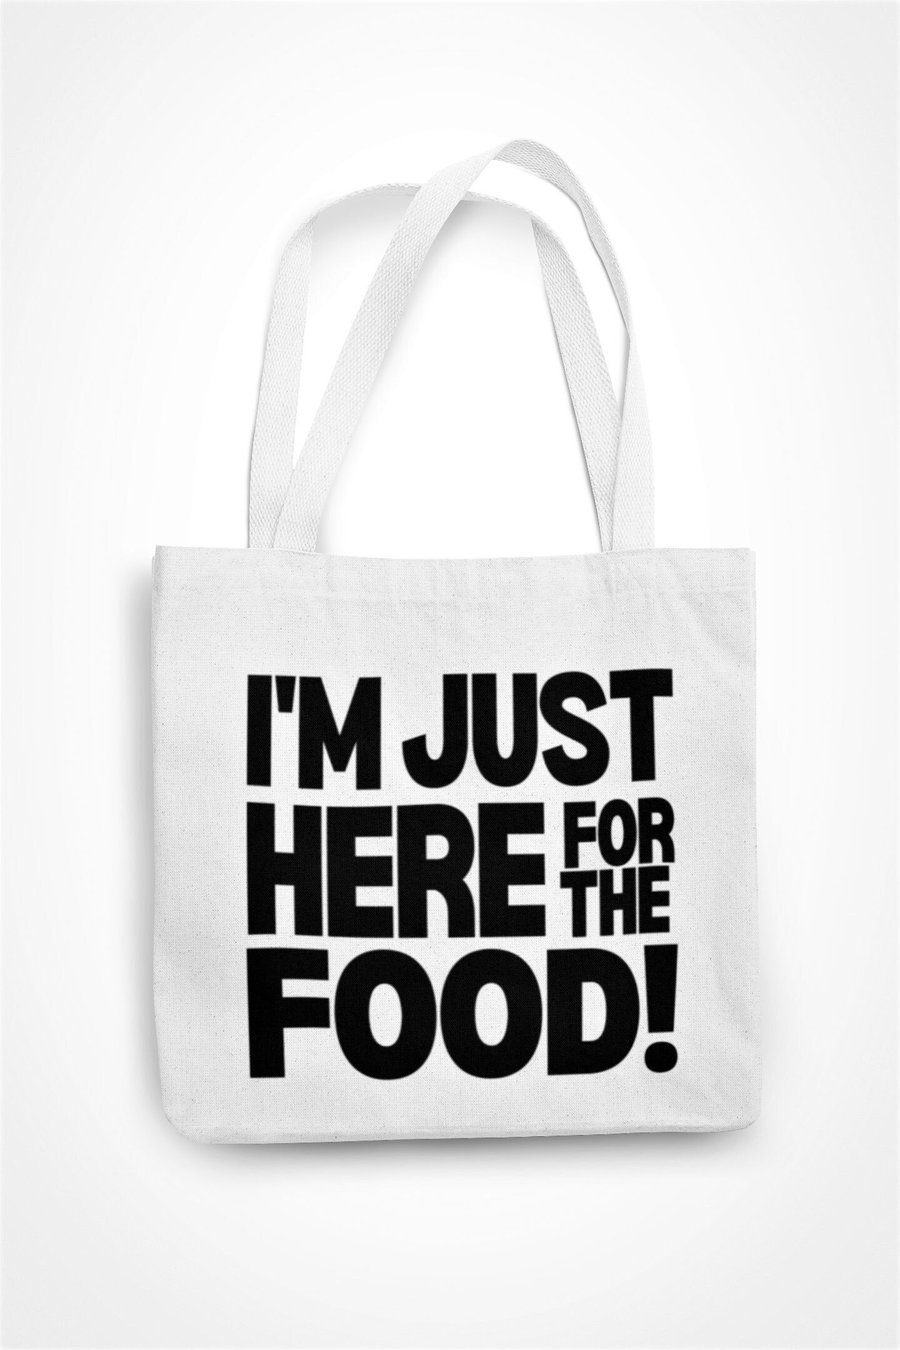 I'm Just Here For The Food Tote Bag Funny Text Shopping Bag Sarcastic Saying 